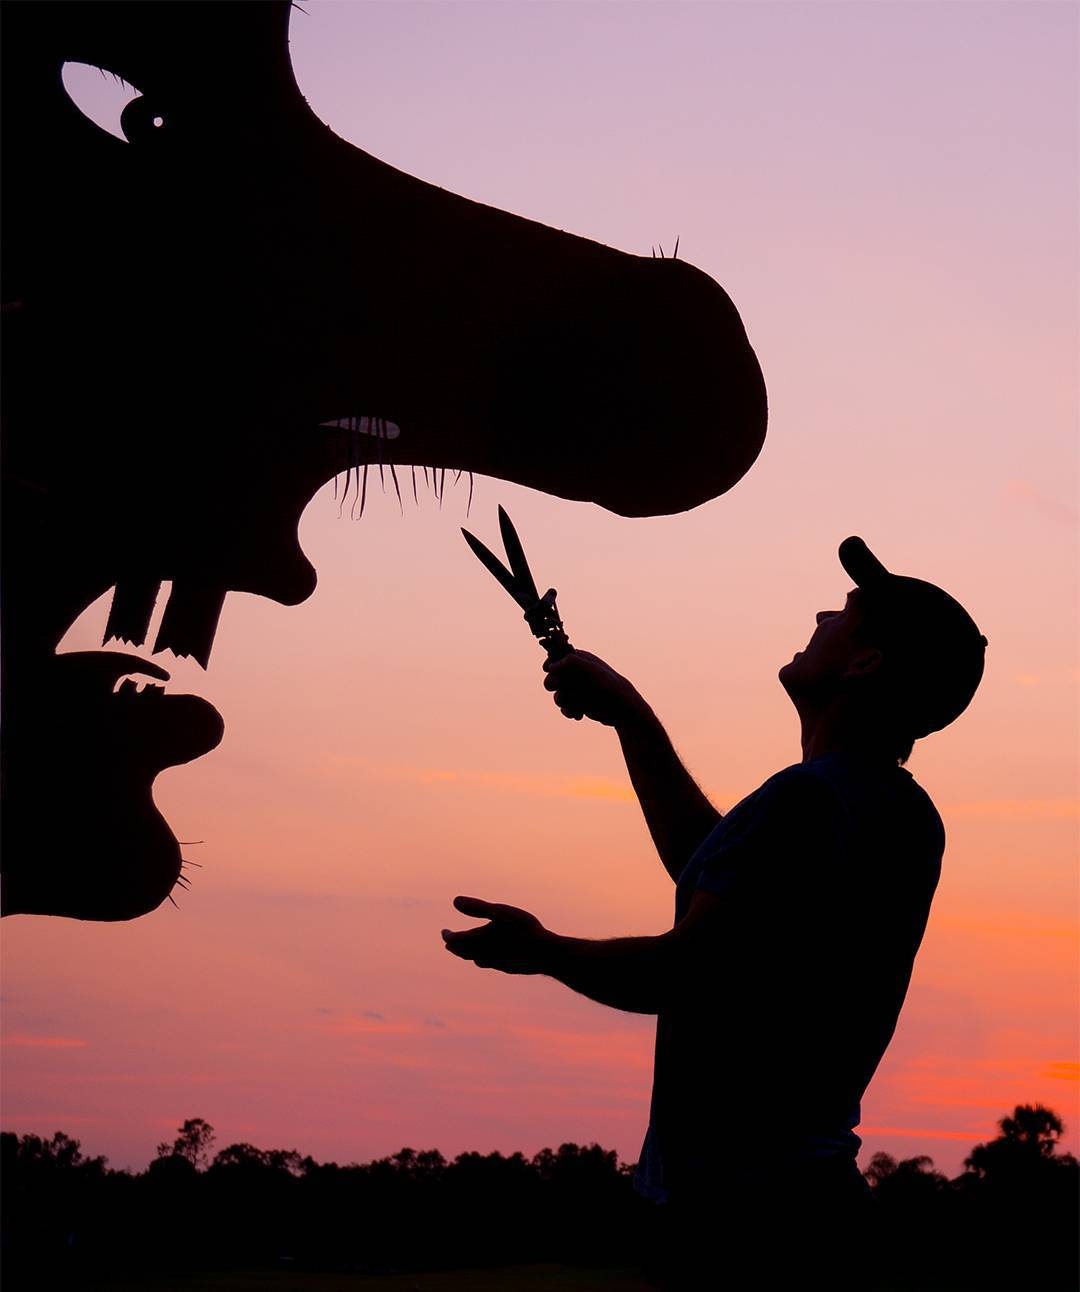 10-Personal-Giant-Groomer-John-Marshall-Sunset-Selfie-Photographs-with-Cardboard-Cutouts-www-designstack-co